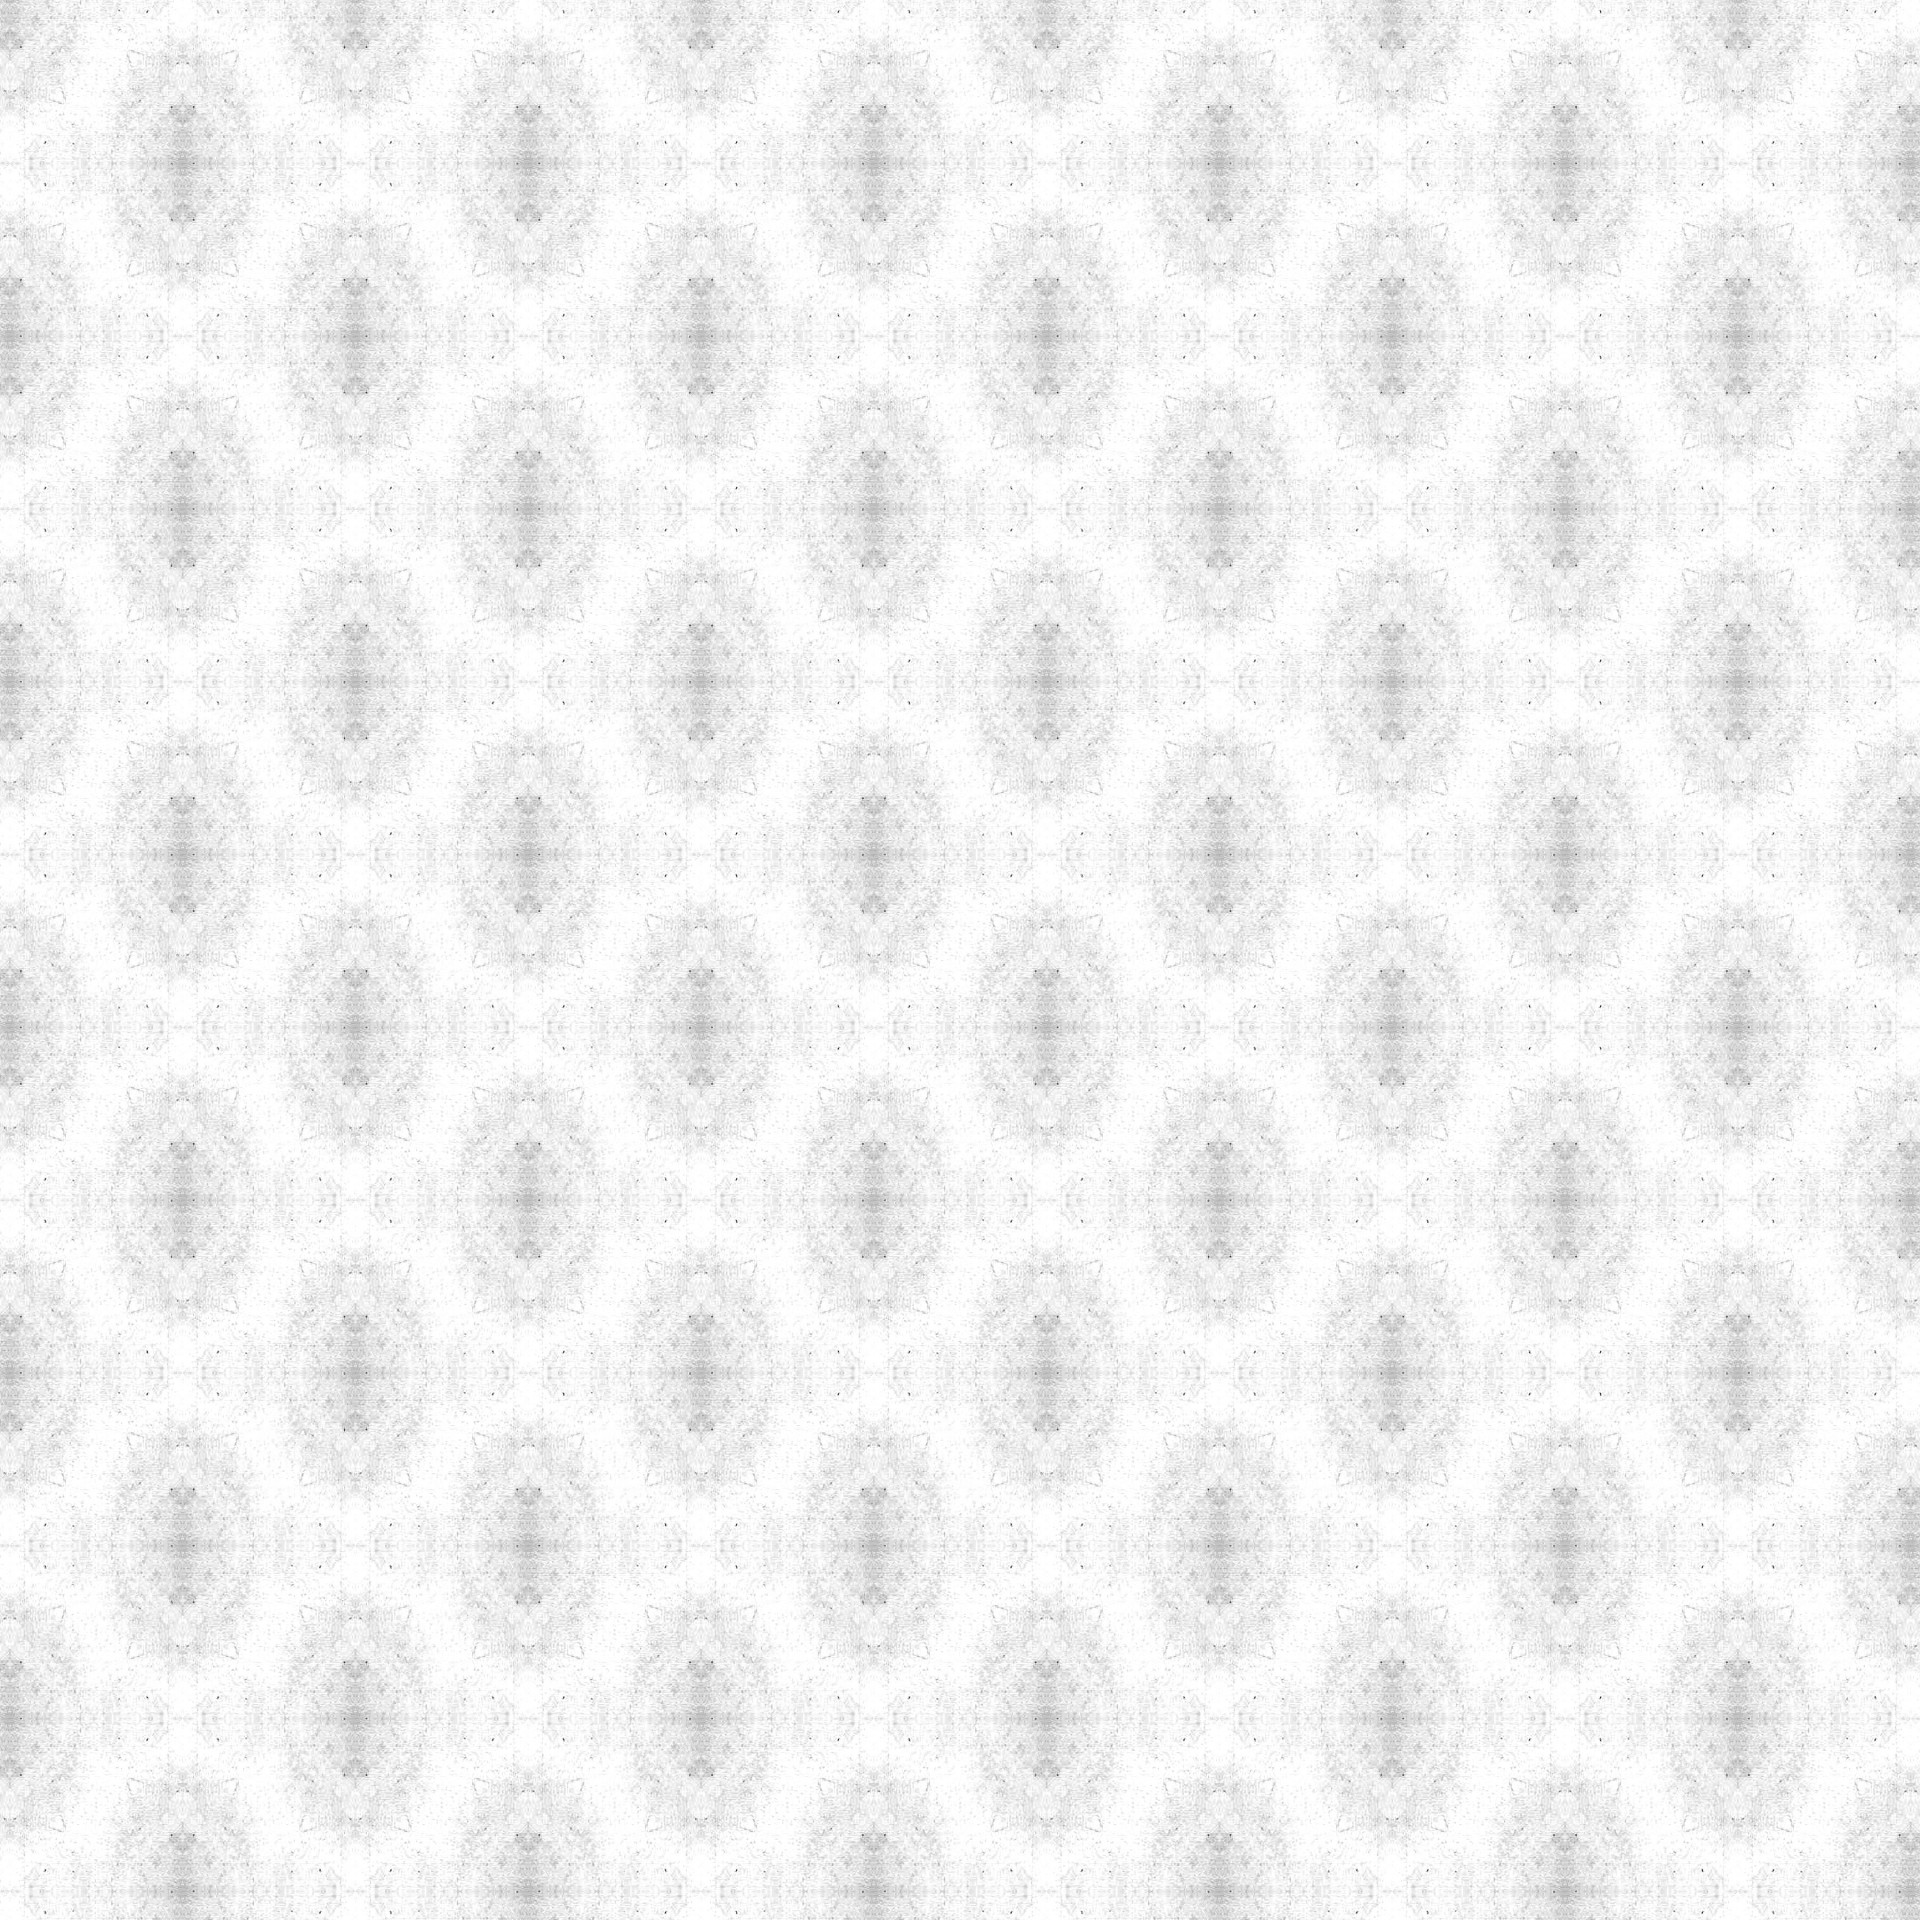 scrapbooking background paper black and white patterned paper (32) free photo